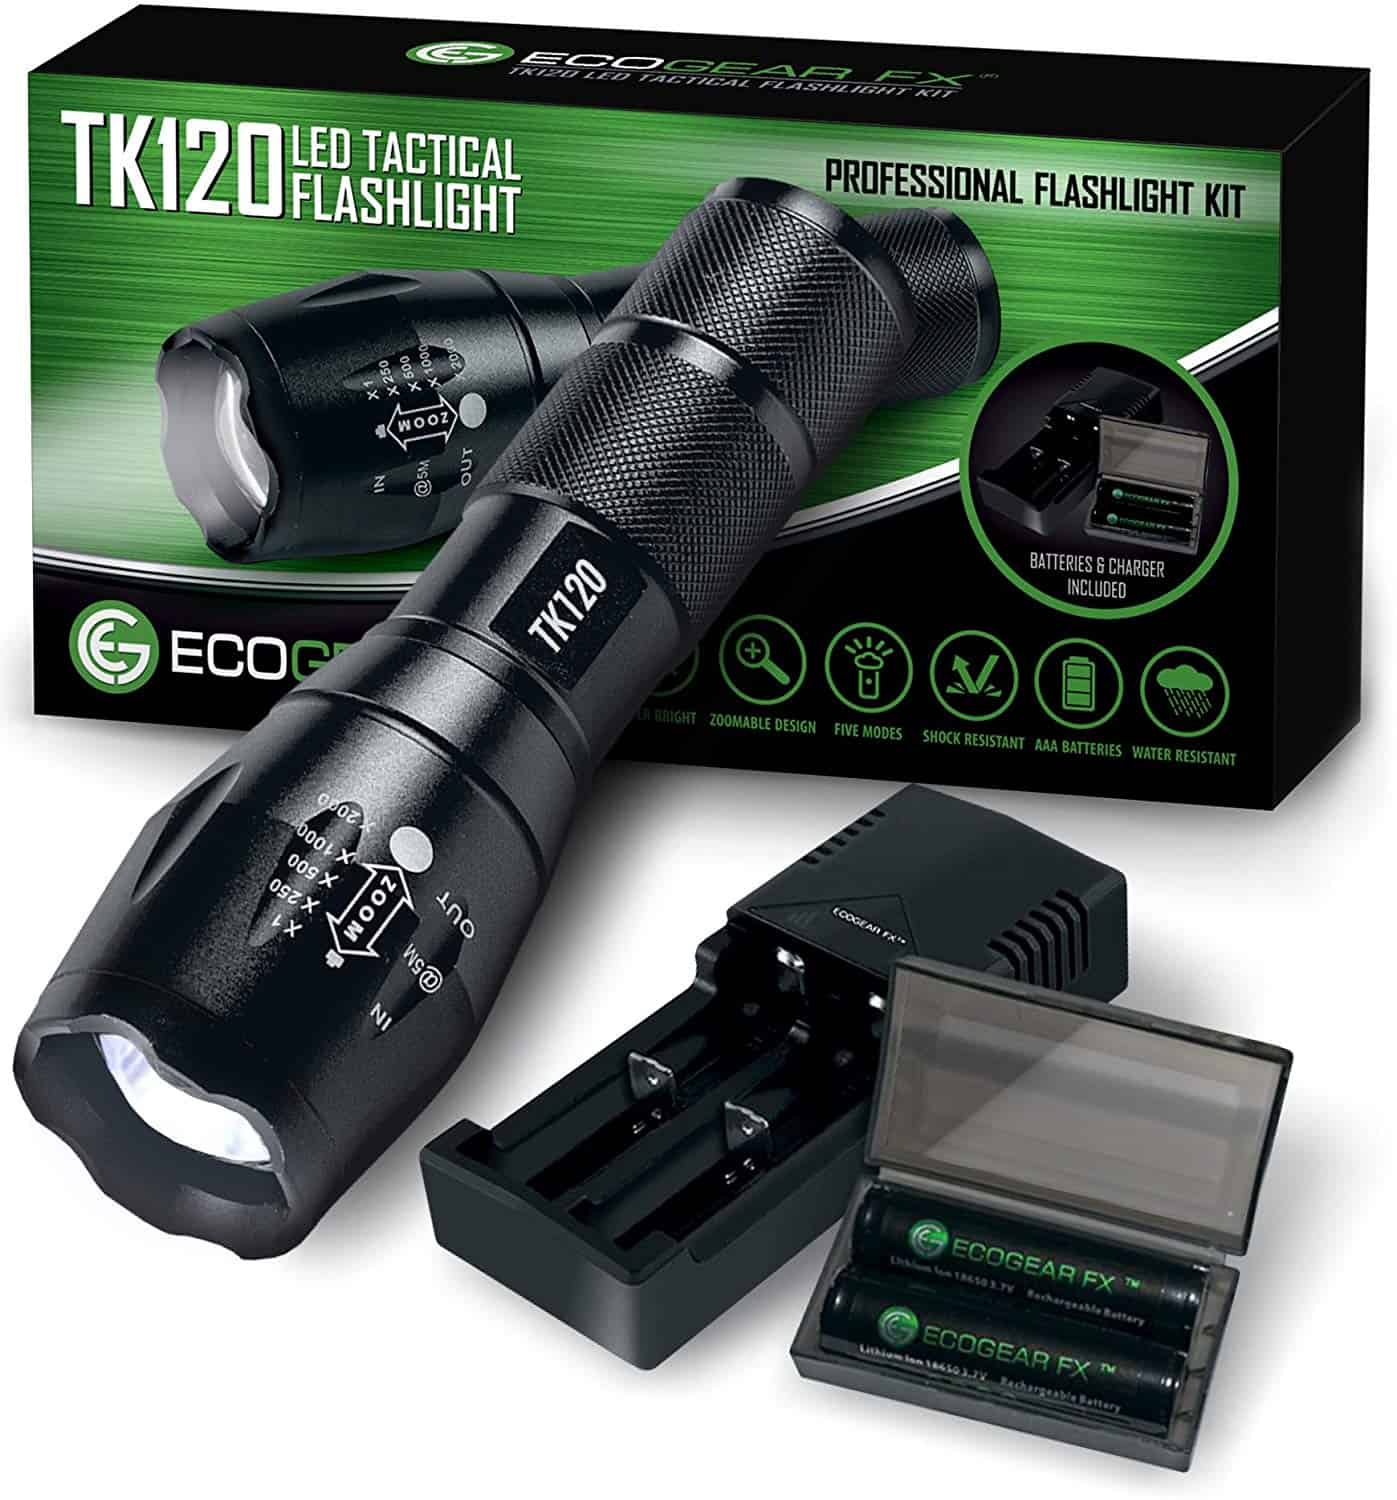 Complete LED Tactical Flashlight Kit - EcoGear FX TK120: Handheld Light with 5 Light Modes, Water Resistant, Zoomable - Includes Rechargeable Batteries and Battery Charger